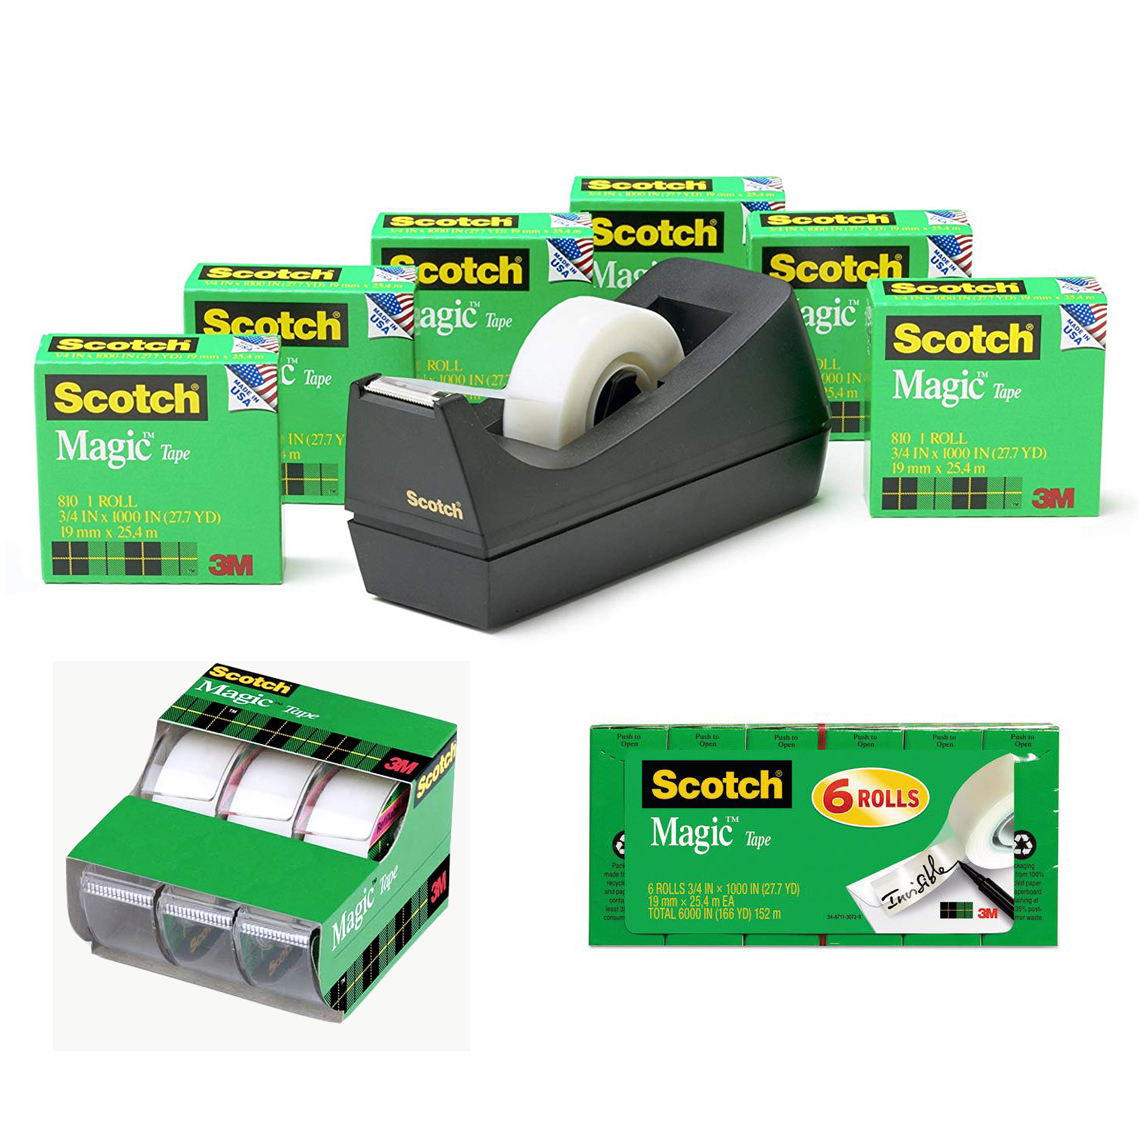 2 Pack Matte Finish Scotch Brand Magic Tape 3/4 x 1000 Inches Transparent Numerous Applications Engineered for Office and Home Use 810K12 Great for Gift Wrapping 12 Refill Rolls Boxed